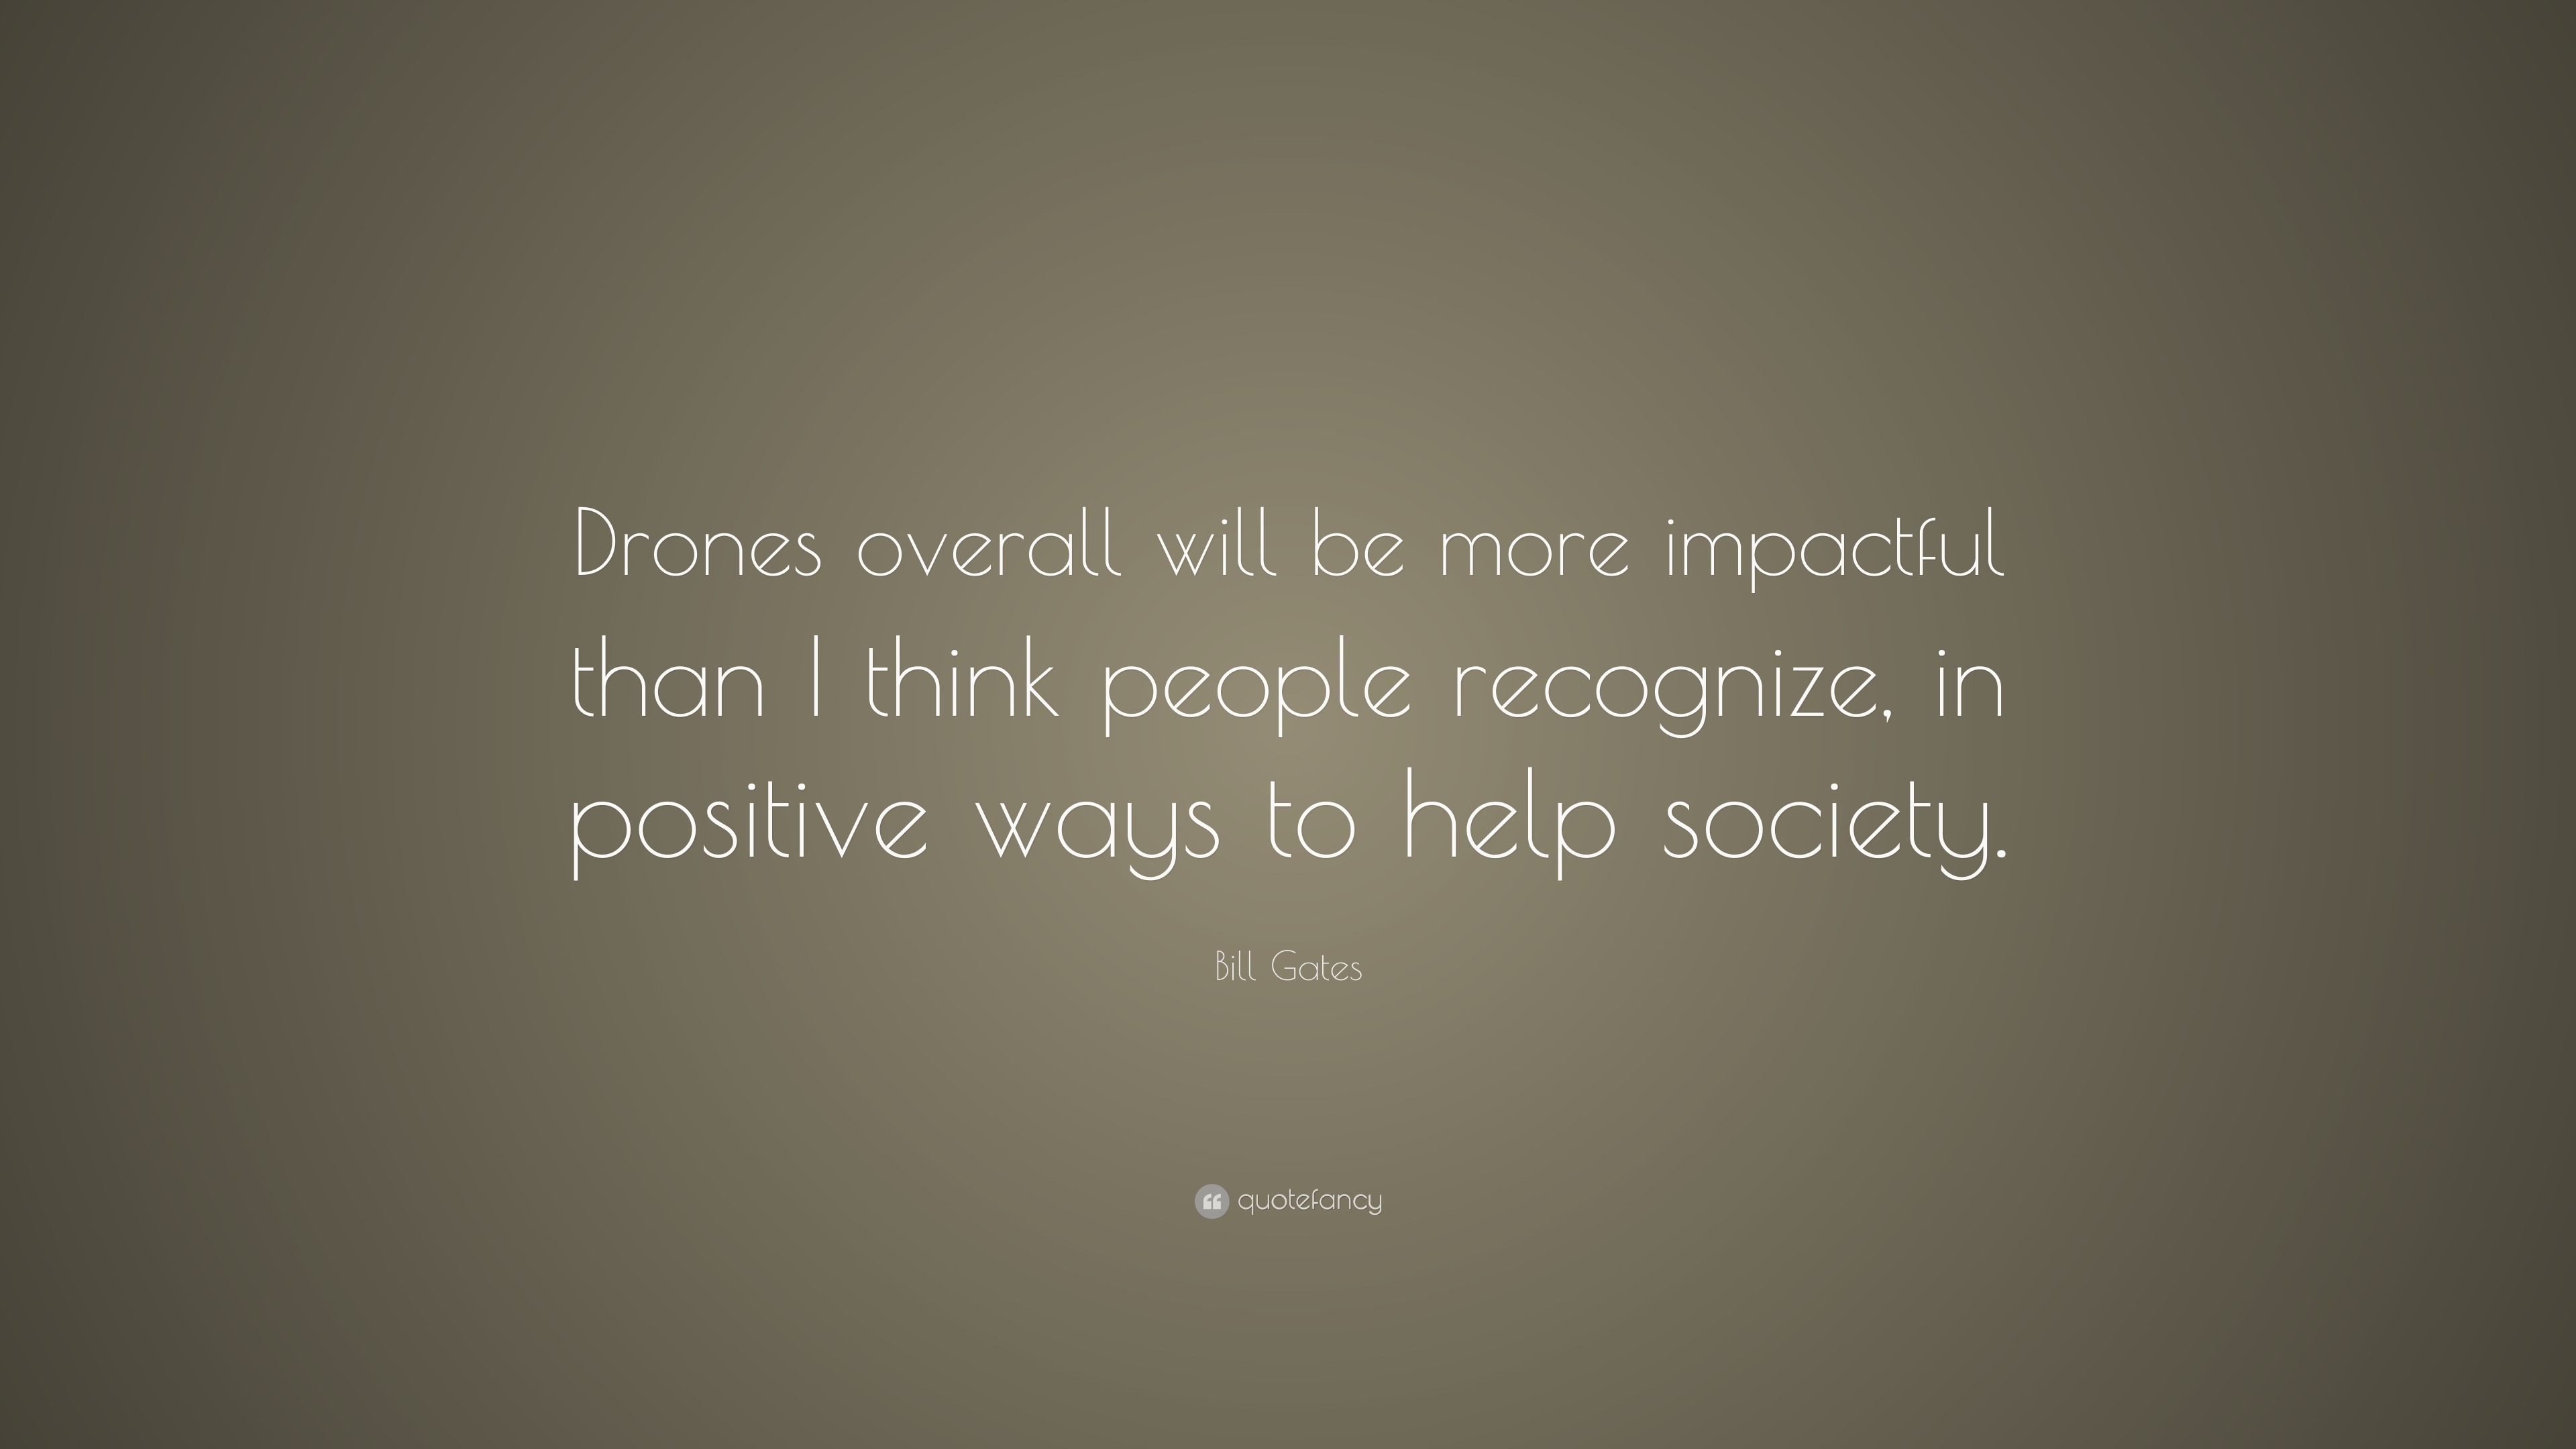 Bill Quote: “Drones overall will be more impactful think people recognize, in positive